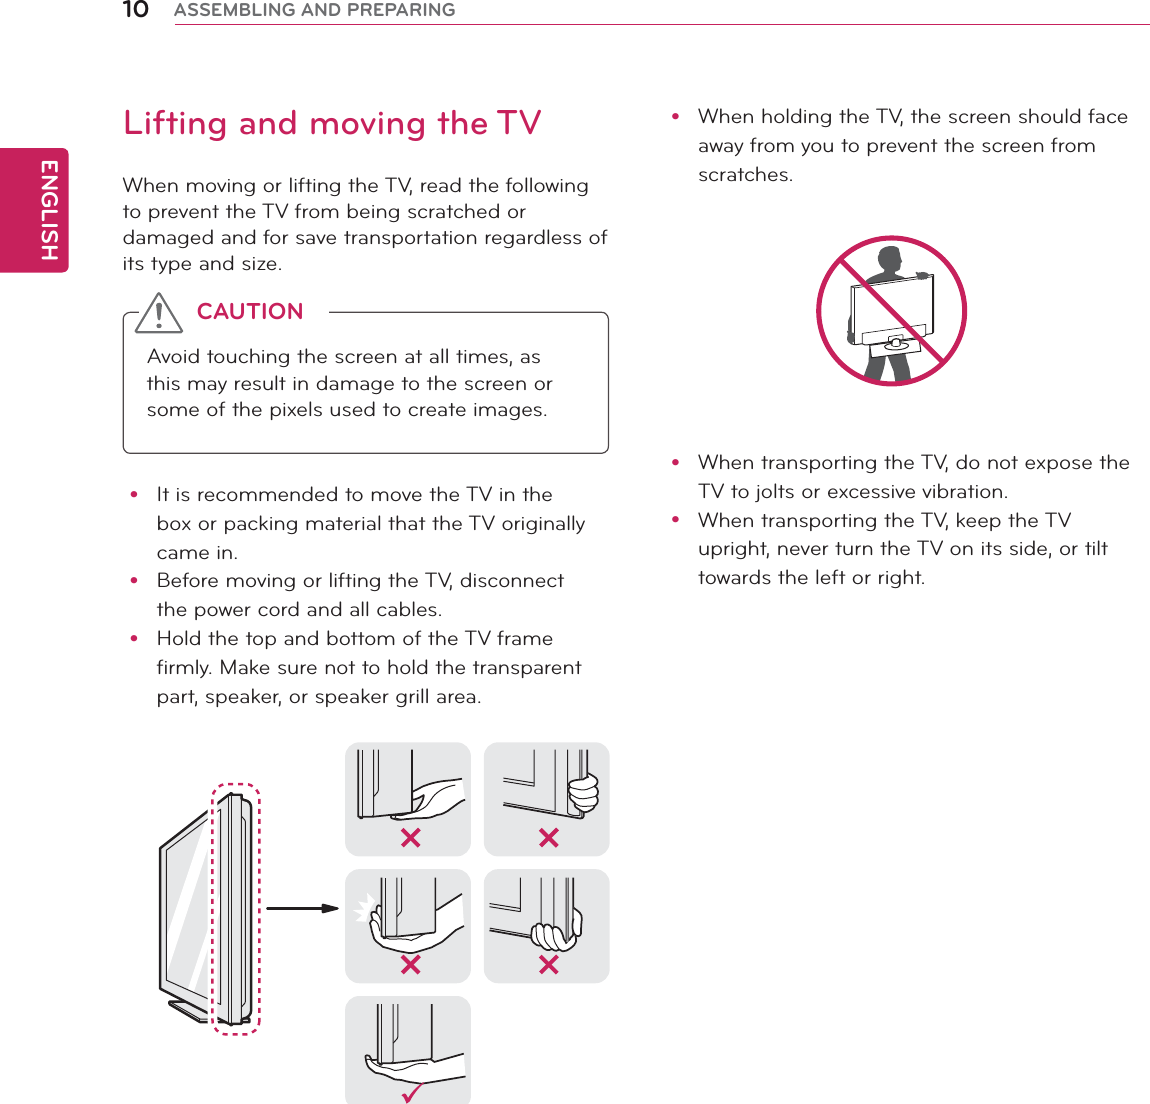 ENGLISH10 ASSEMBLING AND PREPARINGy When holding the TV, the screen should face away from you to prevent the screen from scratches. y When transporting the TV, do not expose the TV to jolts or excessive vibration.y When transporting the TV, keep the TV upright, never turn the TV on its side, or tilt towards the left or right.Lifting and moving the TVWhen moving or lifting the TV, read the following to prevent the TV from being scratched or damaged and for save transportation regardless of its type and size.Avoid touching the screen at all times, as this may result in damage to the screen or some of the pixels used to create images.CAUTIONy It is recommended to move the TV in the box or packing material that the TV originally came in.y Before moving or lifting the TV, disconnect the power cord and all cables.y Hold the top and bottom of the TV frame firmly. Make sure not to hold the transparent part, speaker, or speaker grill area.